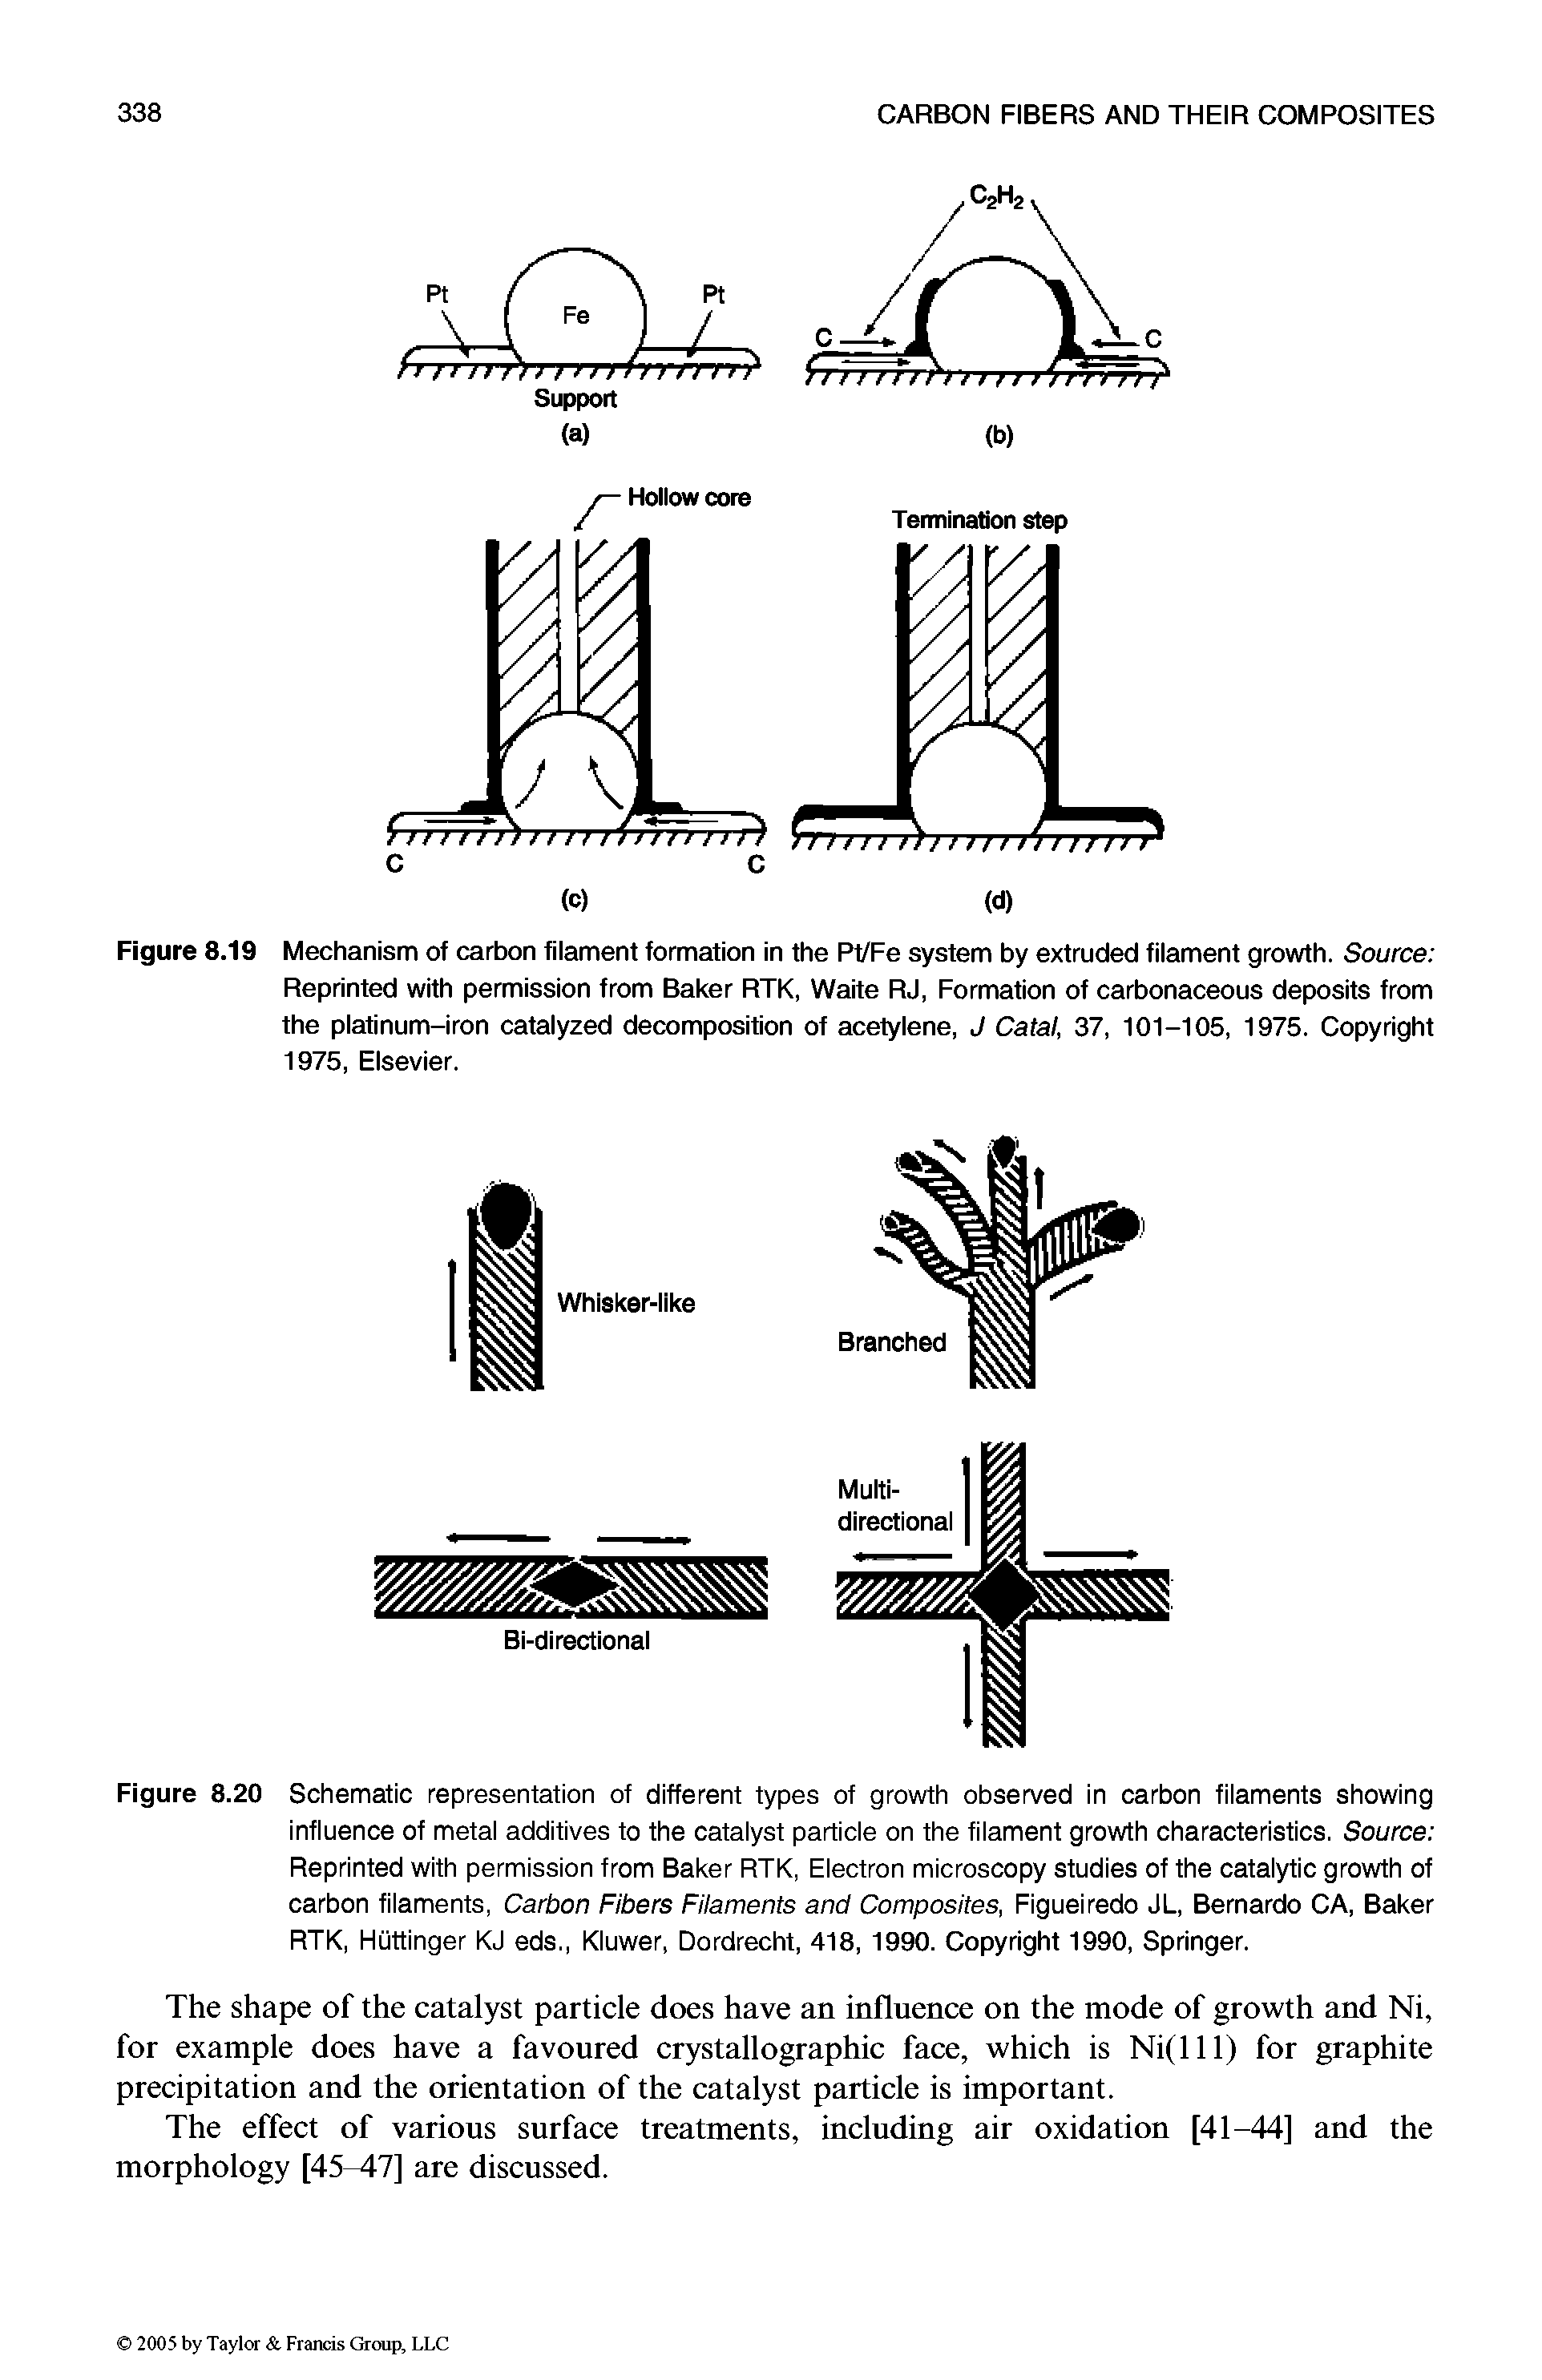 Figure 8.19 Mechanism of carbon filament formation in the PVFe system by extruded filament growth. Source Reprinted with permission from Baker RTK, Waite RJ, Formation of carbonaceous deposits from the platinum-iron catalyzed decomposition of acetylene, J Catal, 37, 101-105, 1975. Copyright 1975, Elsevier.